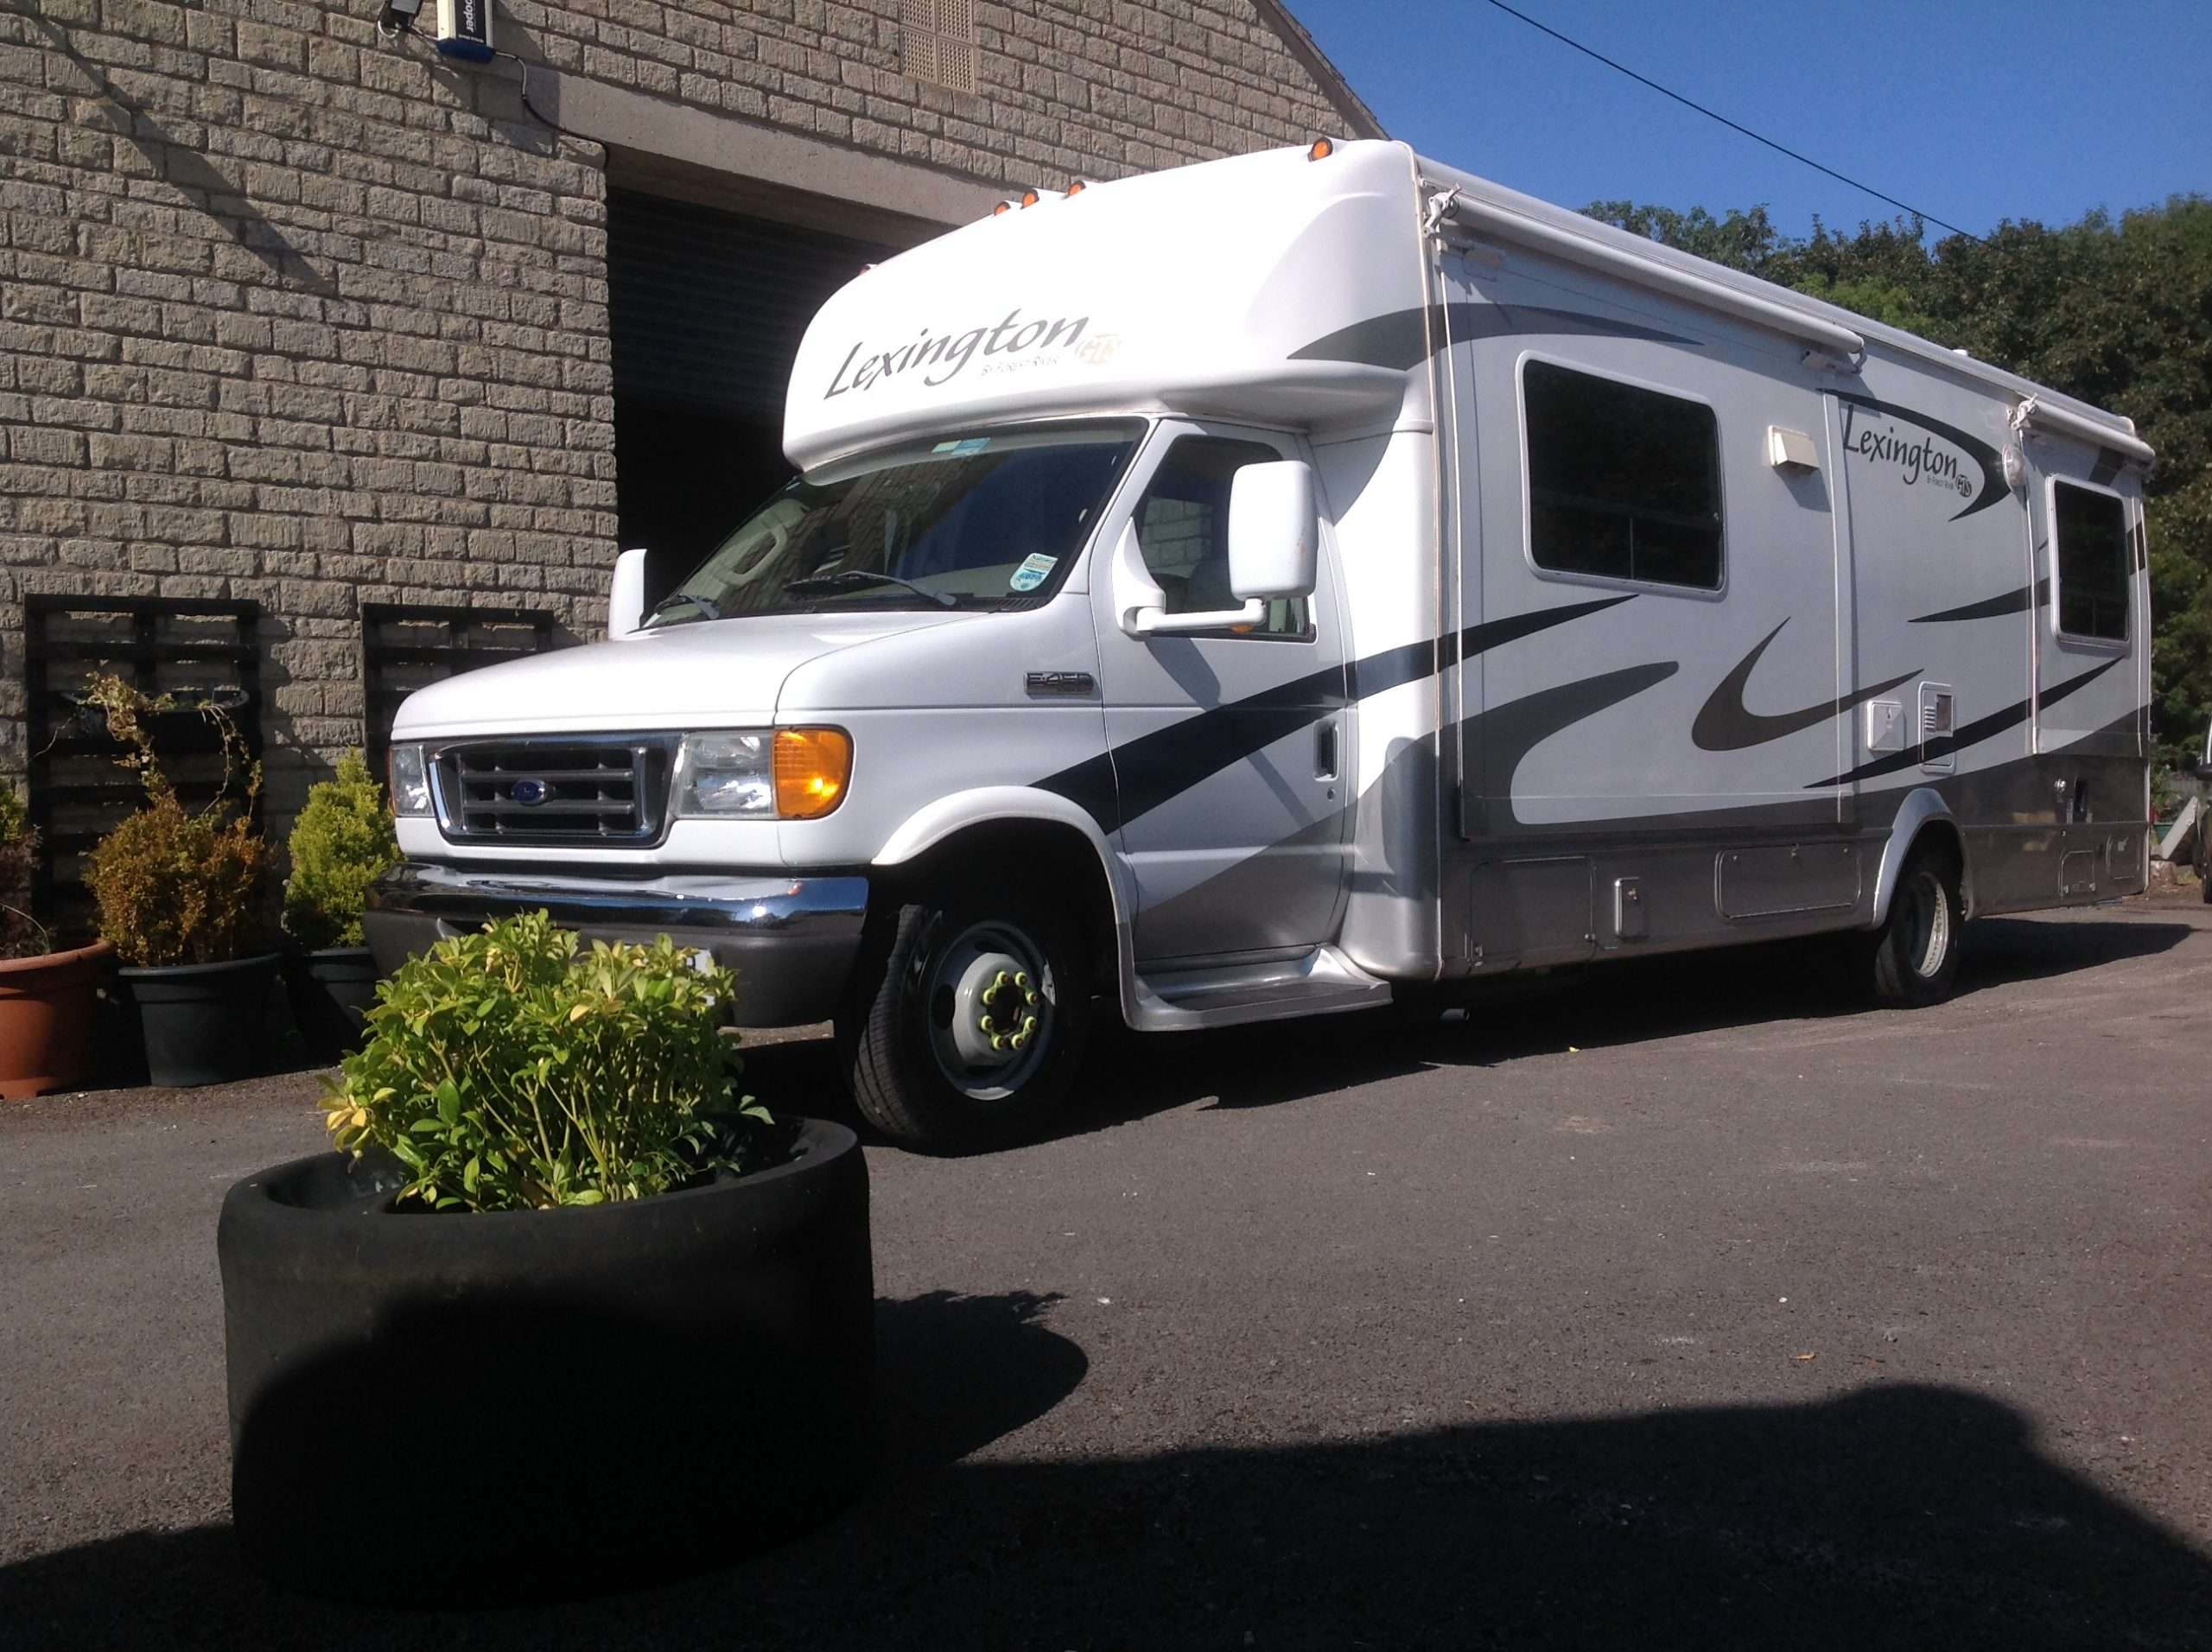 Motorhome and RV Detailing